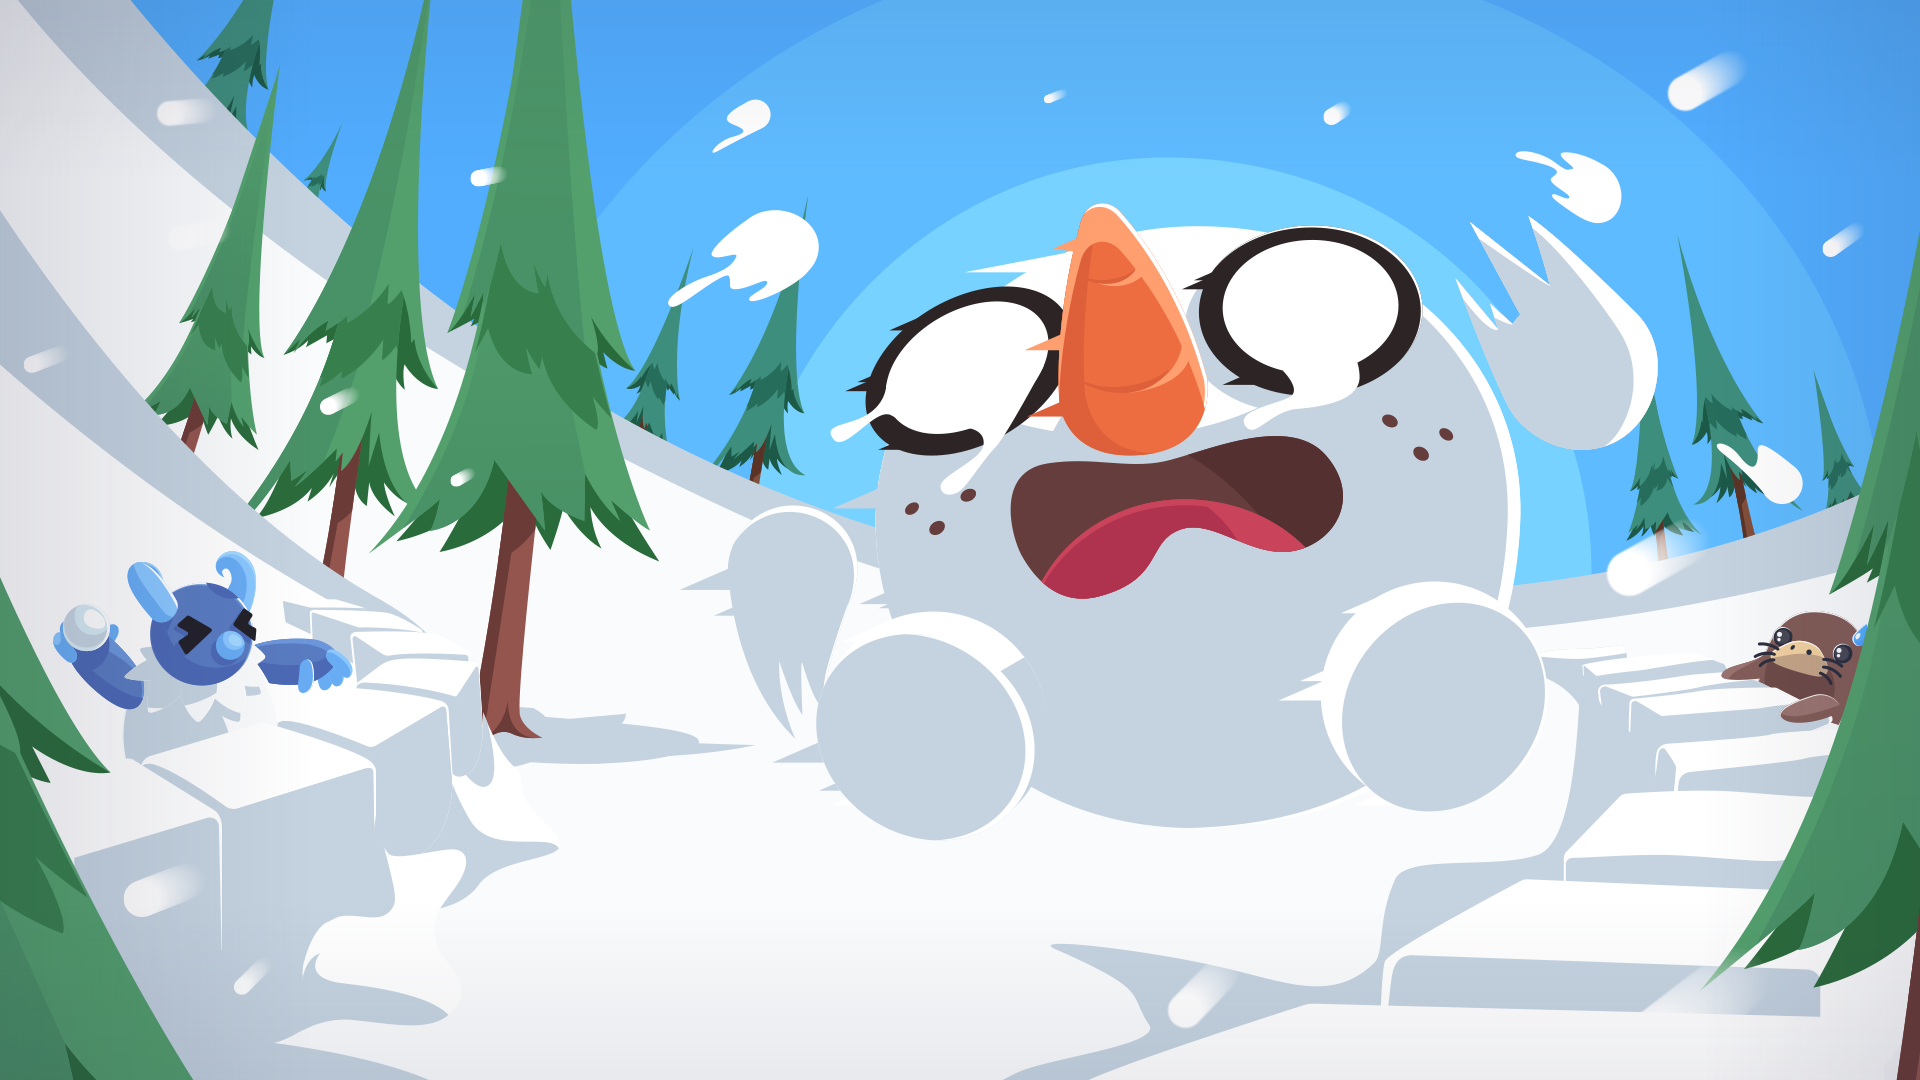 A flustered Snowball Pet rolling down a snowy hillside while being pelted with snowballs from a Yeti.